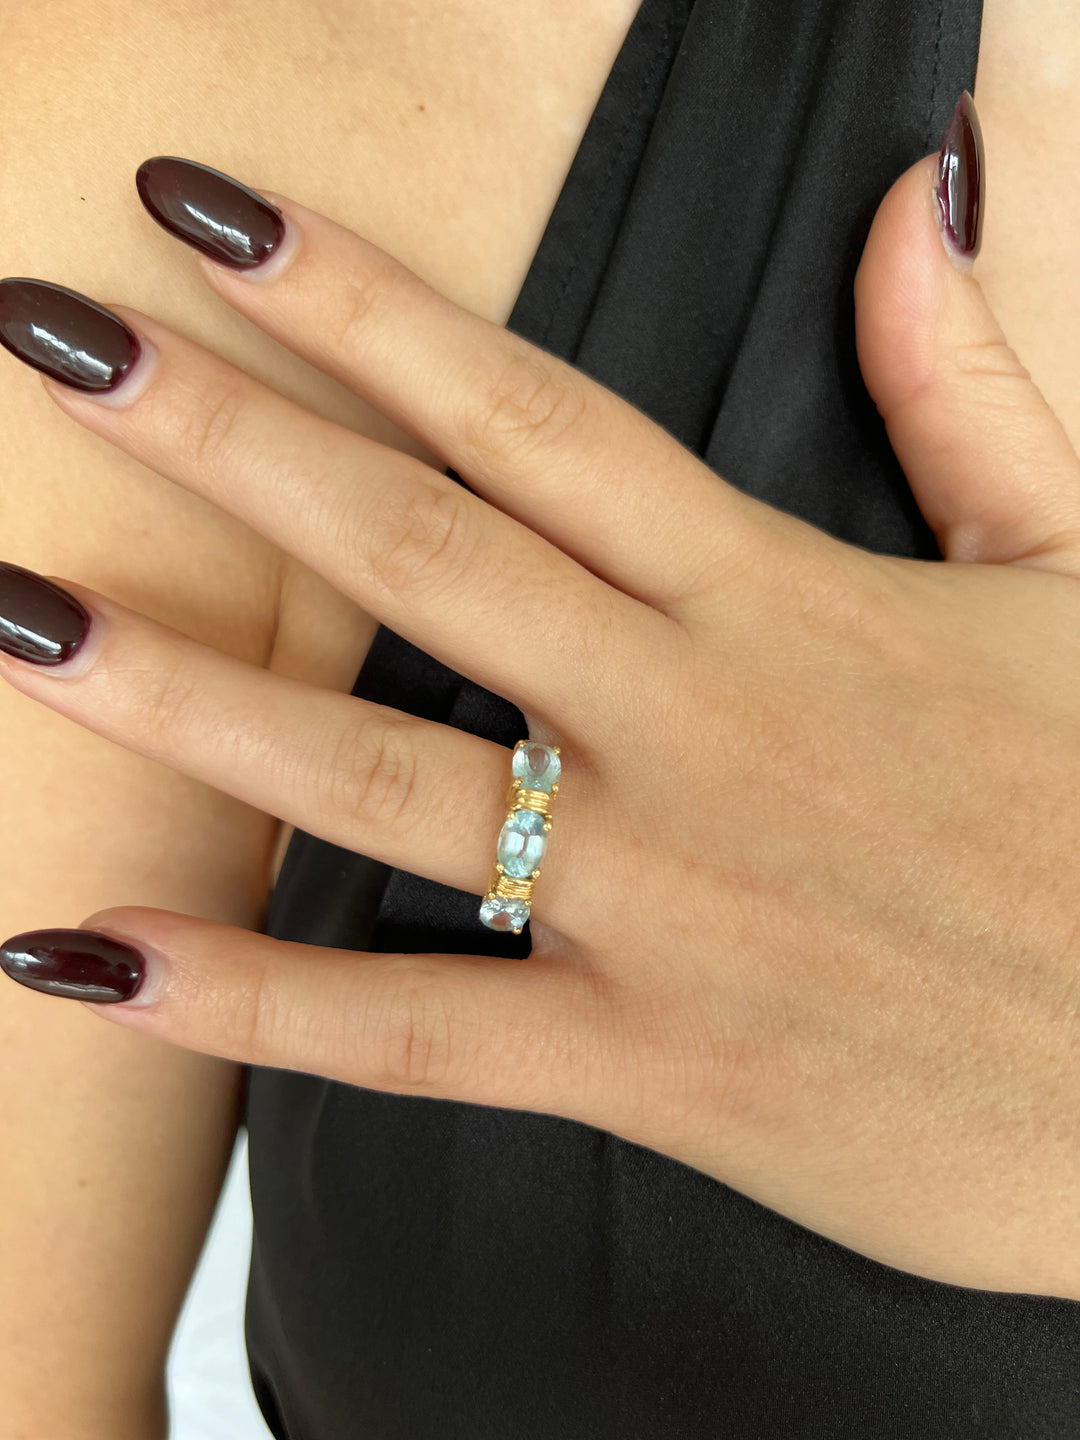 Blue Topaz and 14k Yellow Gold Three Stone Ring